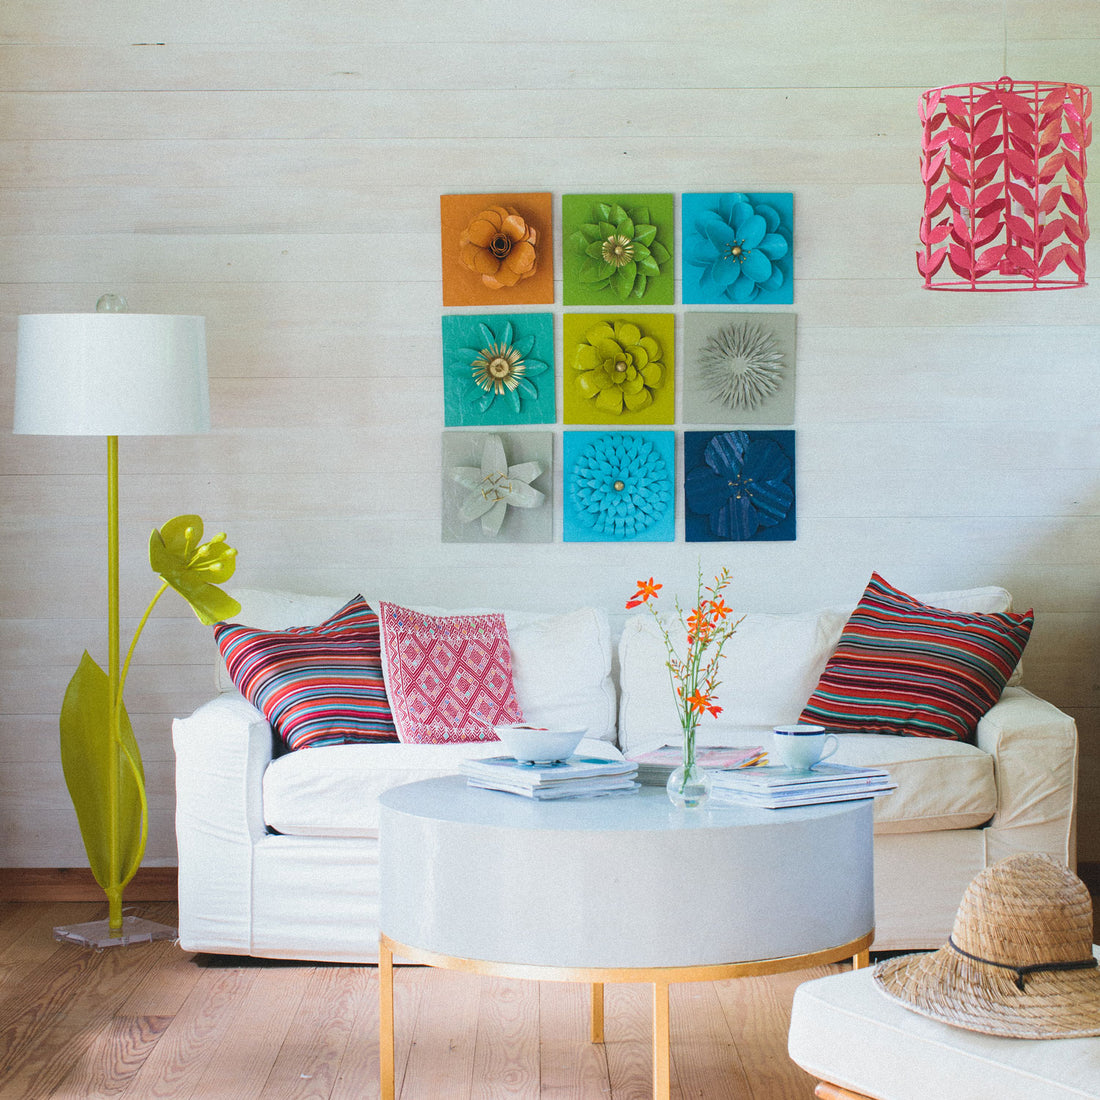 Passion Flower Wall Tile in bright living room